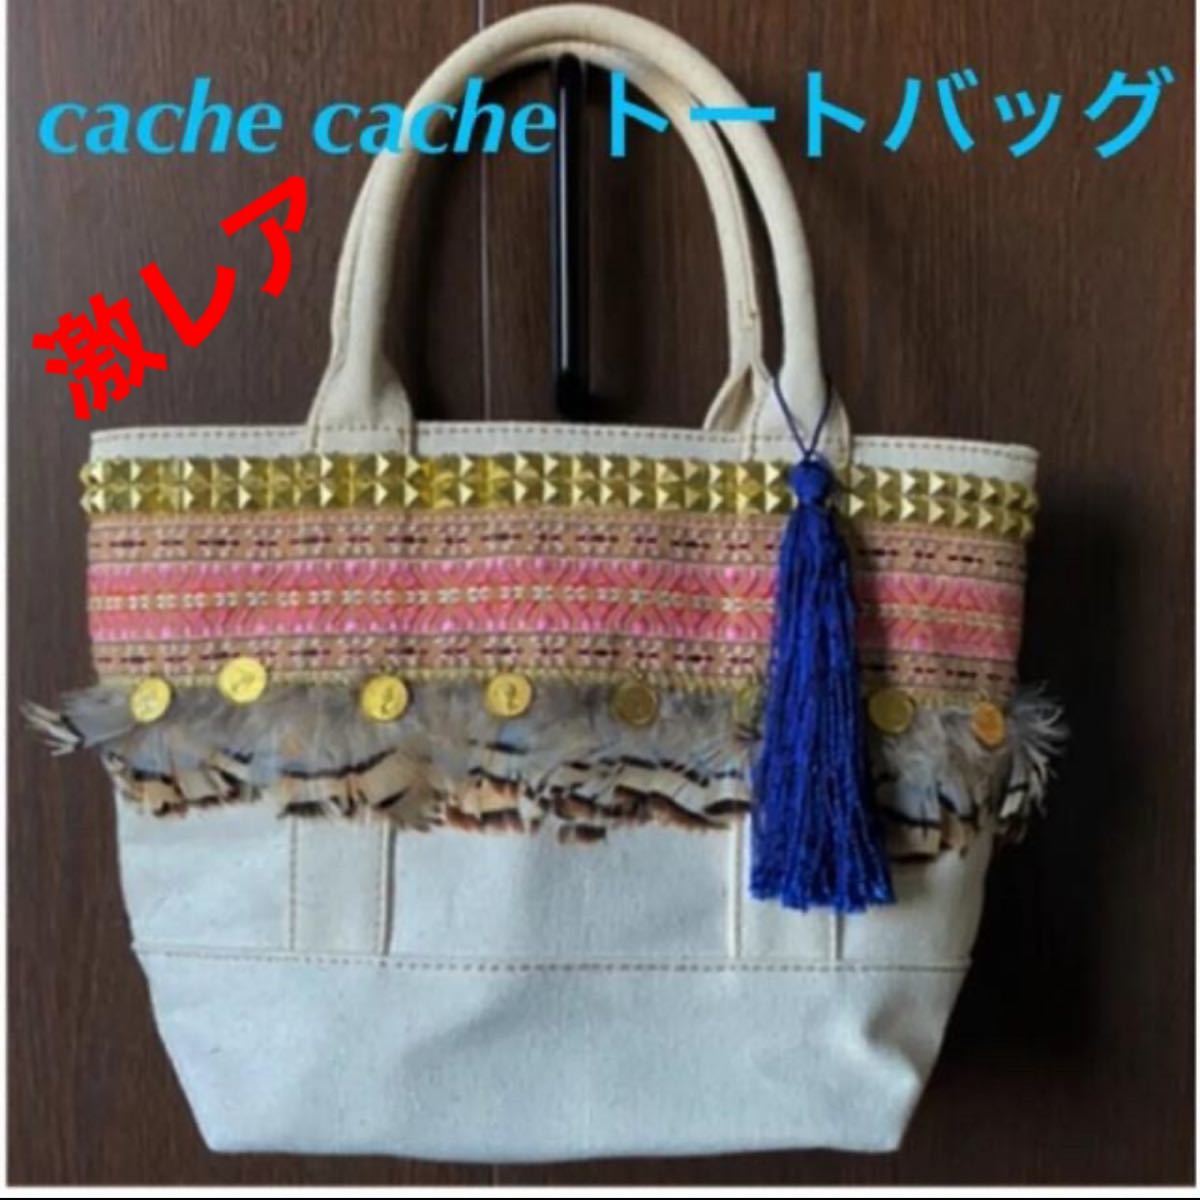 cache cache デザイントートバッグ